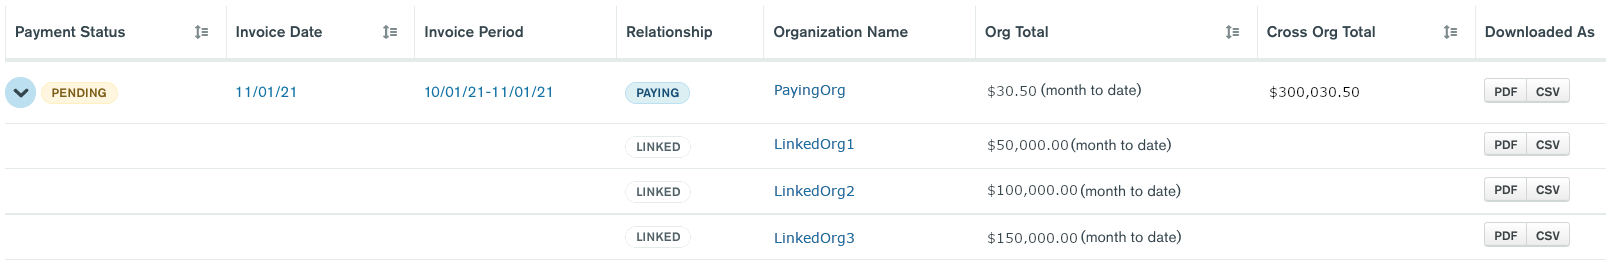 The paying organization invoice shows costs incurred for that
organization and a list of costs for linked organizations